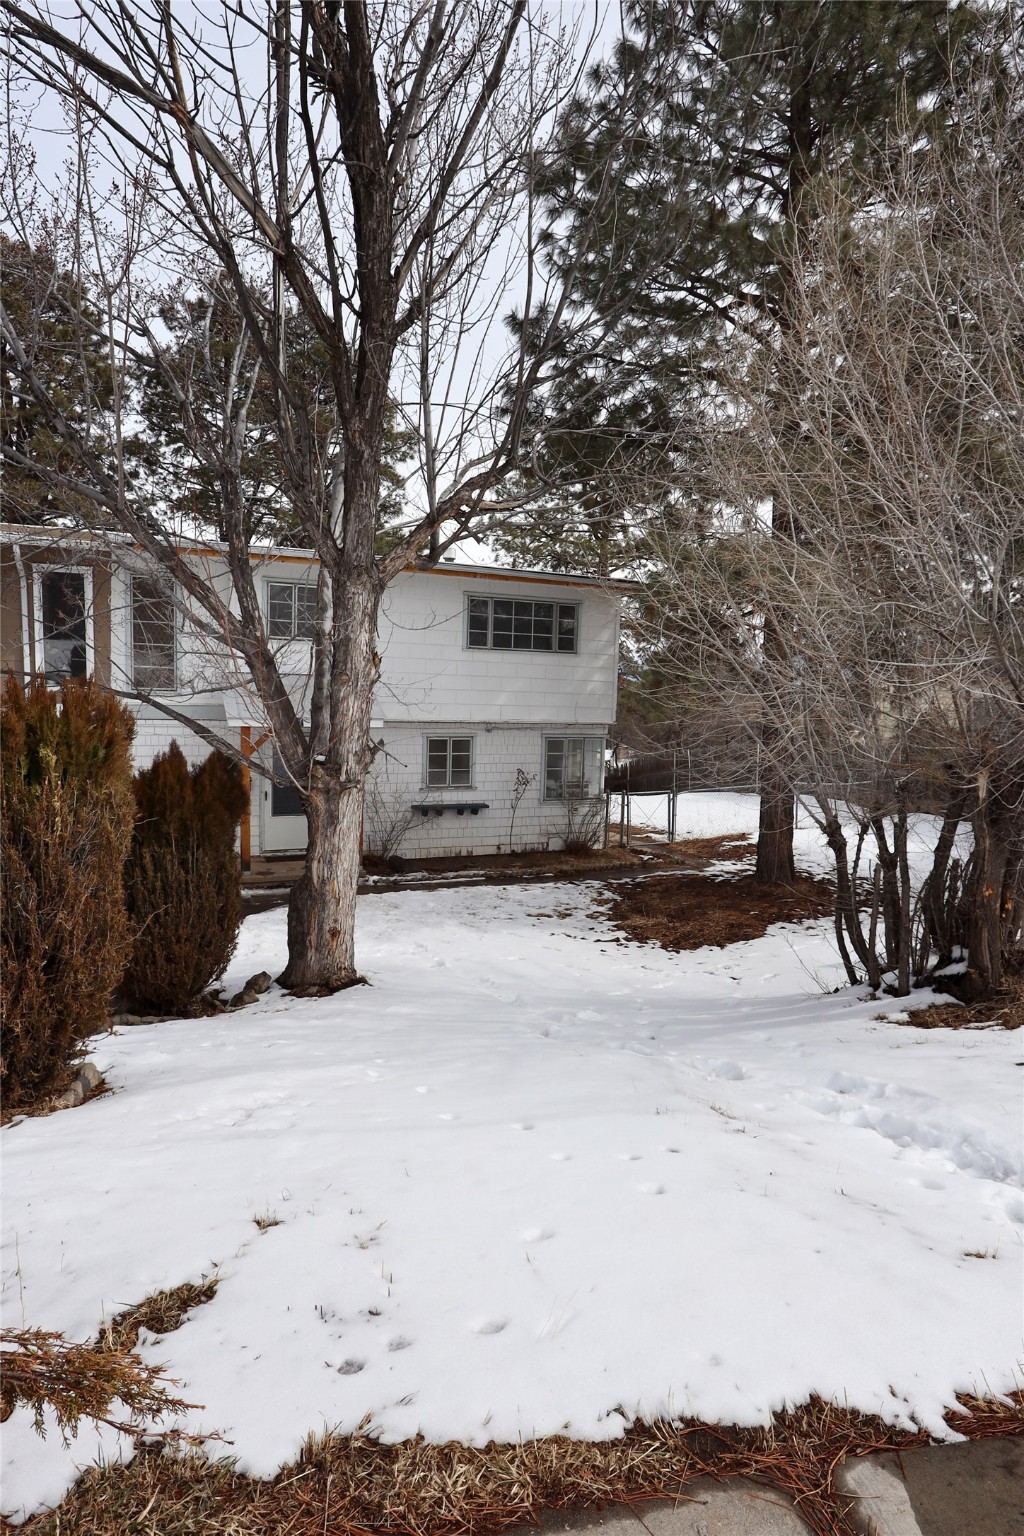 2374 36th B, Los Alamos, New Mexico 87544, 3 Bedrooms Bedrooms, ,1 BathroomBathrooms,Residential,For Sale,2374 36th B,202334875